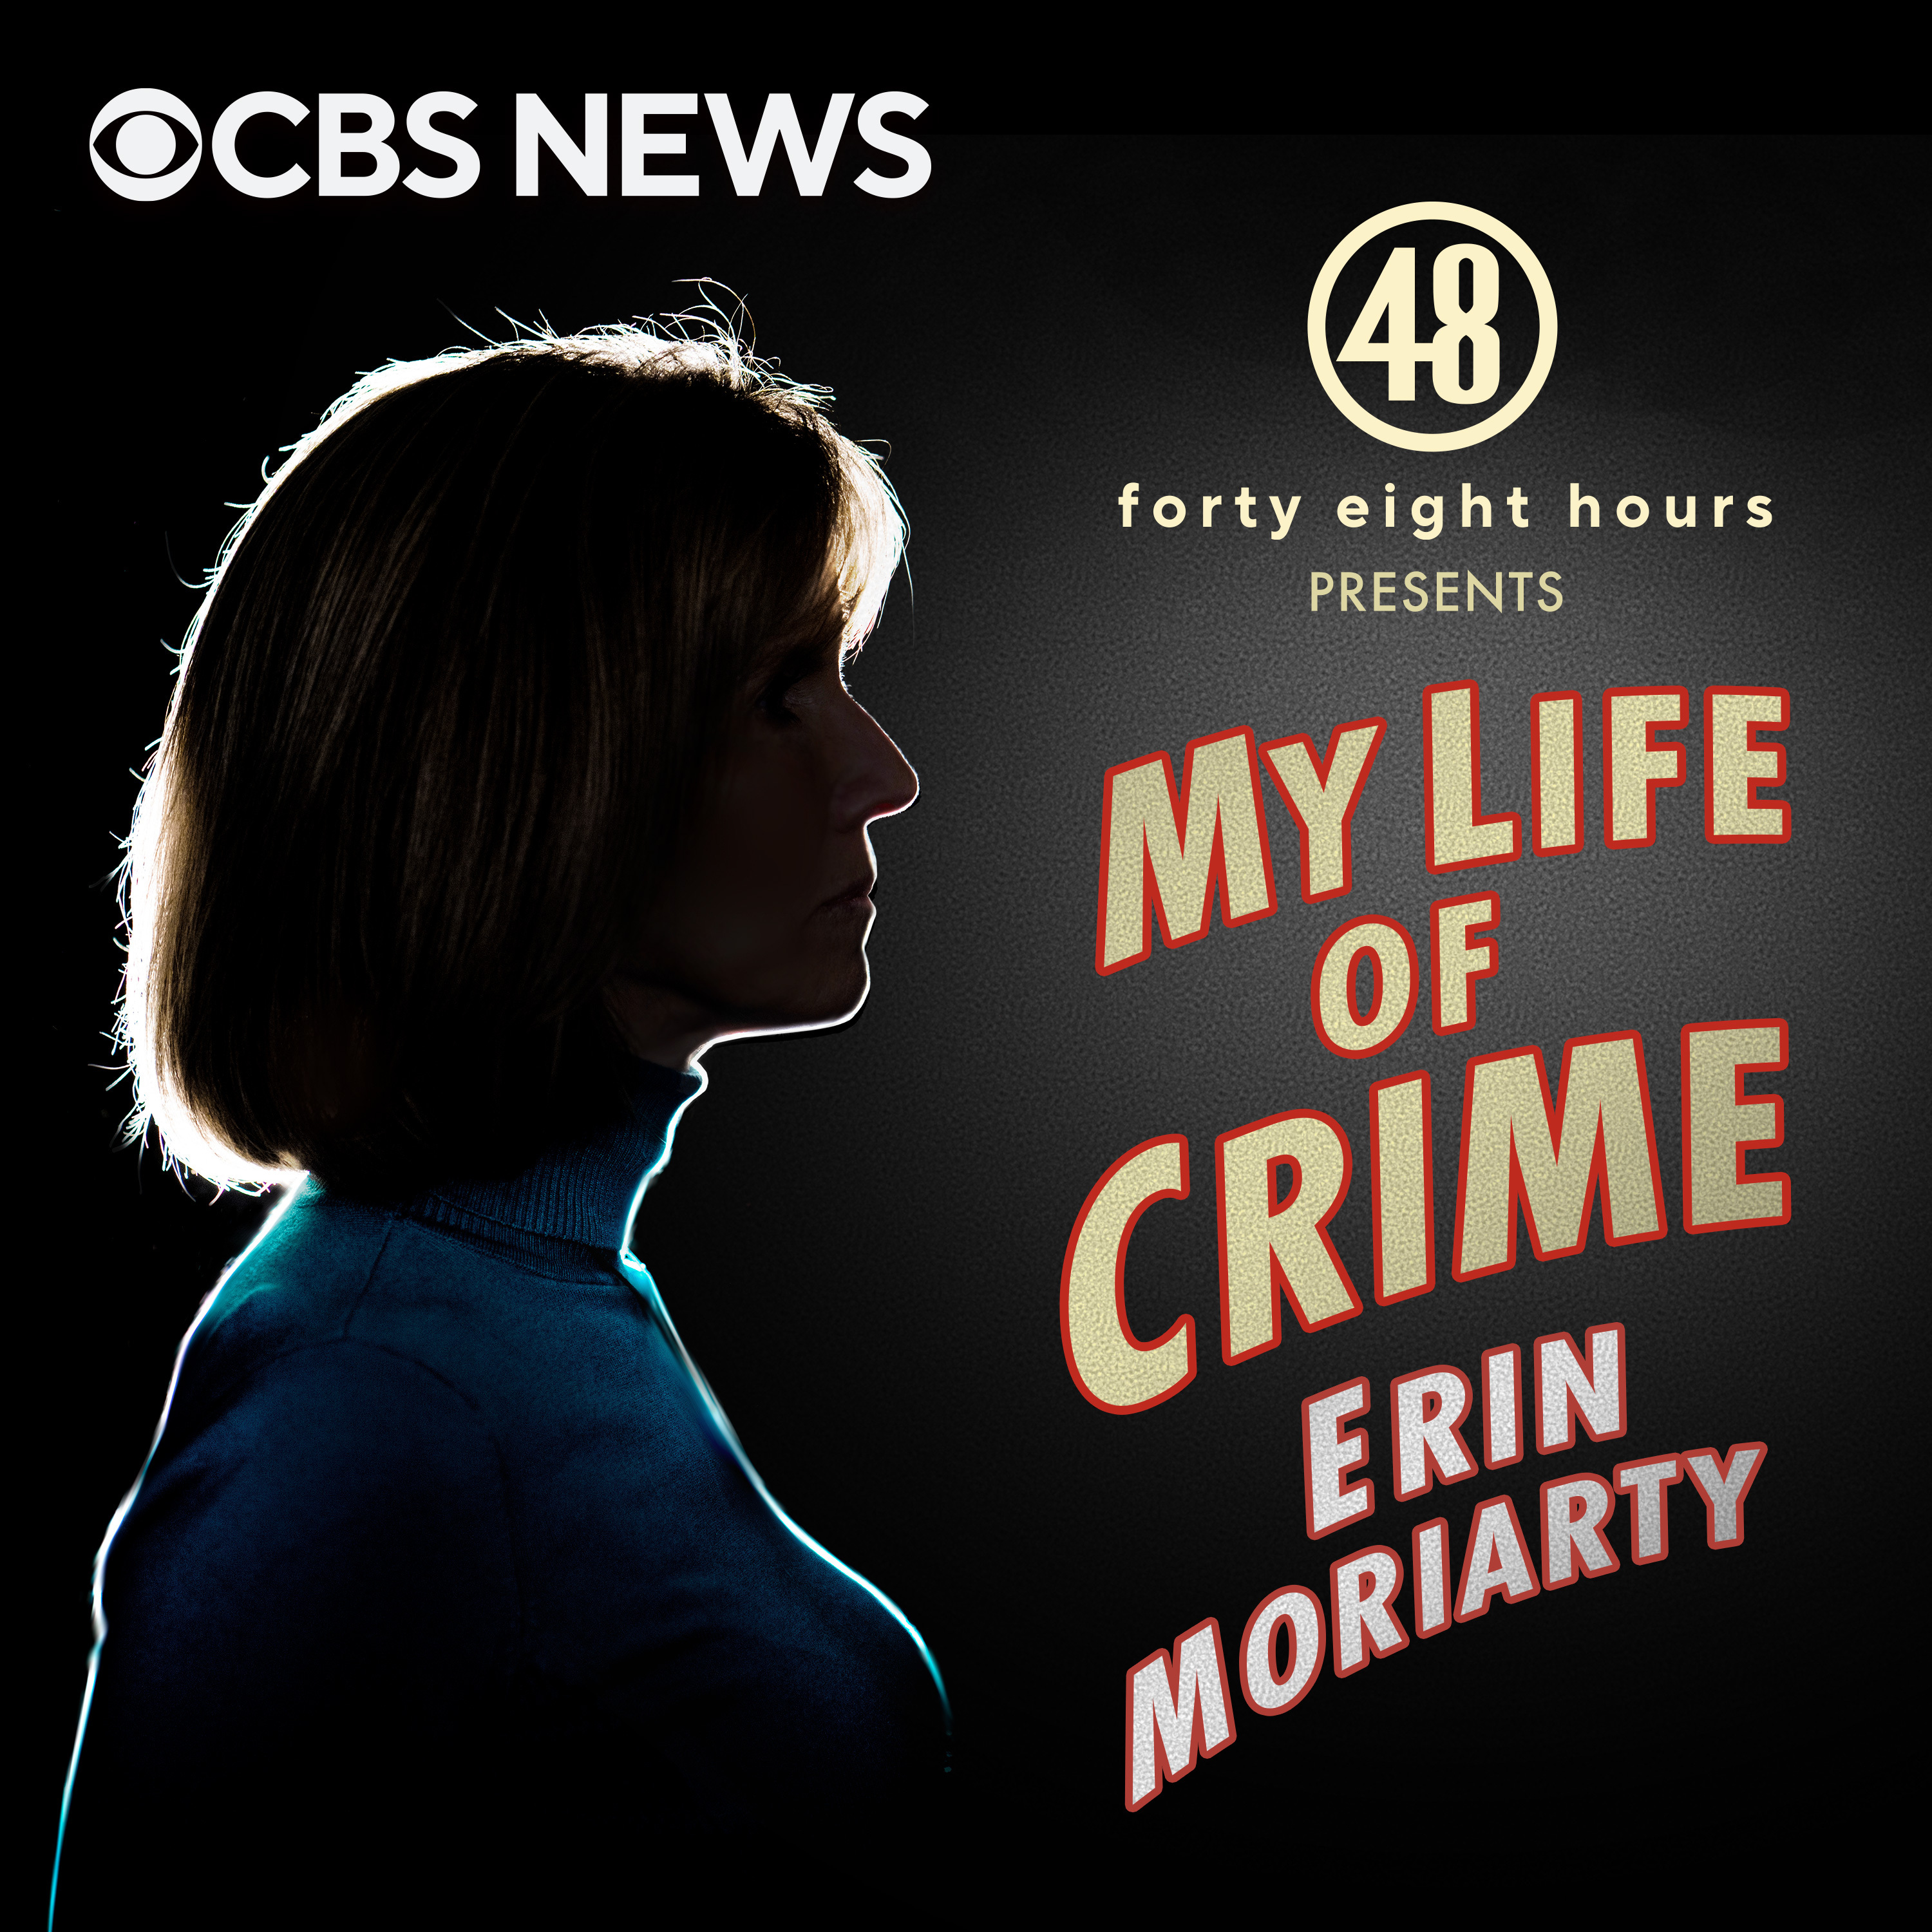 Victim or Abuser: The Interview with Tracey Grissom | My Life of Crime